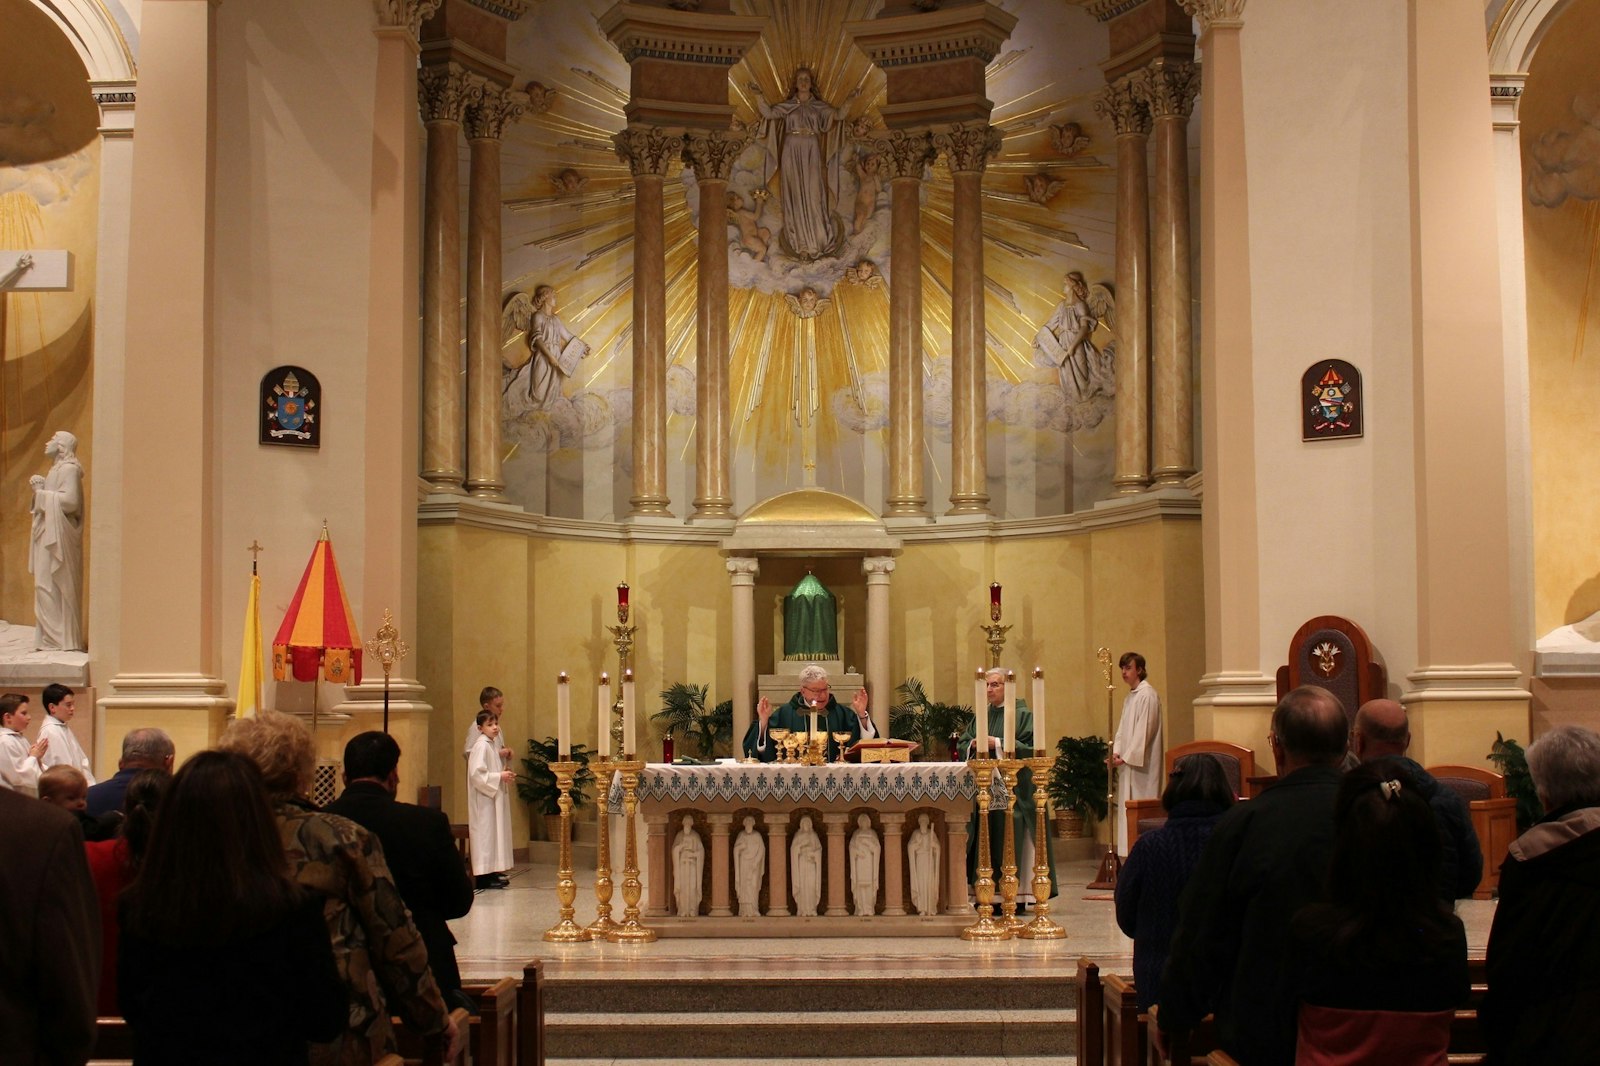 Bishop Monforton celebrates Mass at St. Mary of the Assumption Basilica in Marietta, Ohio. Each year, the bishop celebrated anniversaries for married couples celebrating 10 years and up, in order to help children see the Church celebrating their parents' marriages.